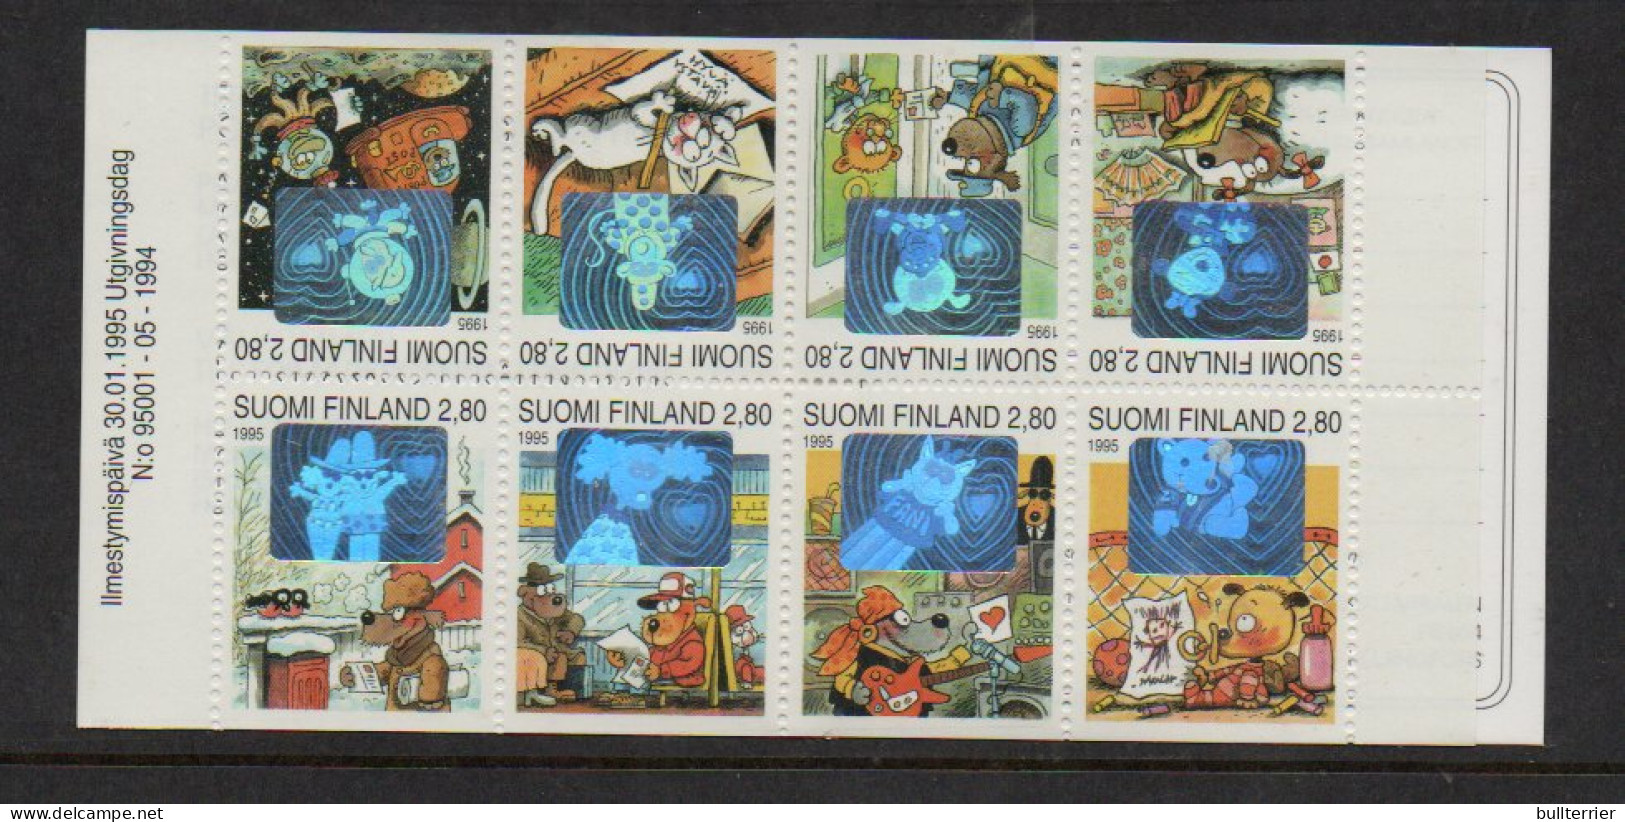 FINLAND - 1995 GREETINGS HOLOGRAM STAMPS BOOKLET COMPLET  MINT NEVER HINGED  SG CAT £20 - Unused Stamps